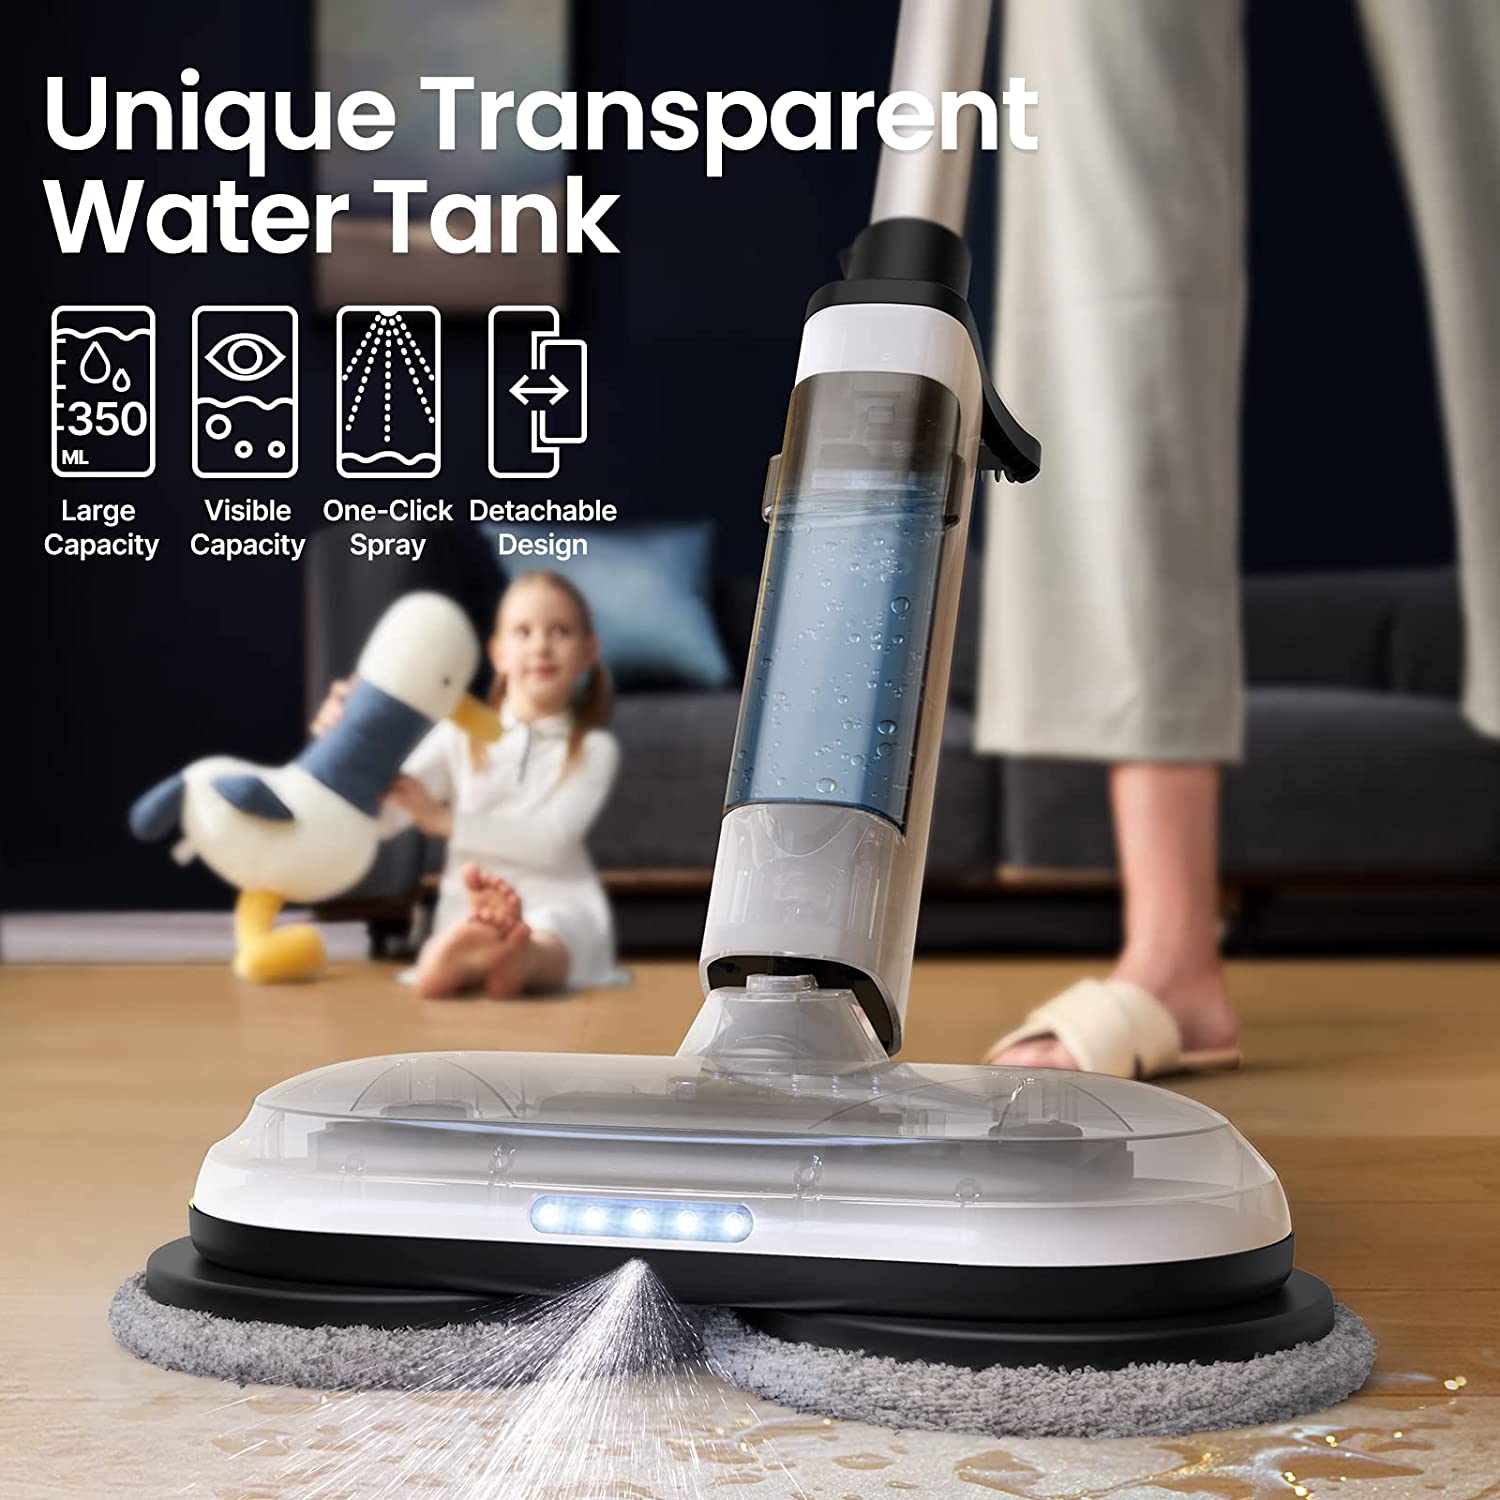 Cordless Self Cleaning Electric Mop with Bucket Water Sprey LED